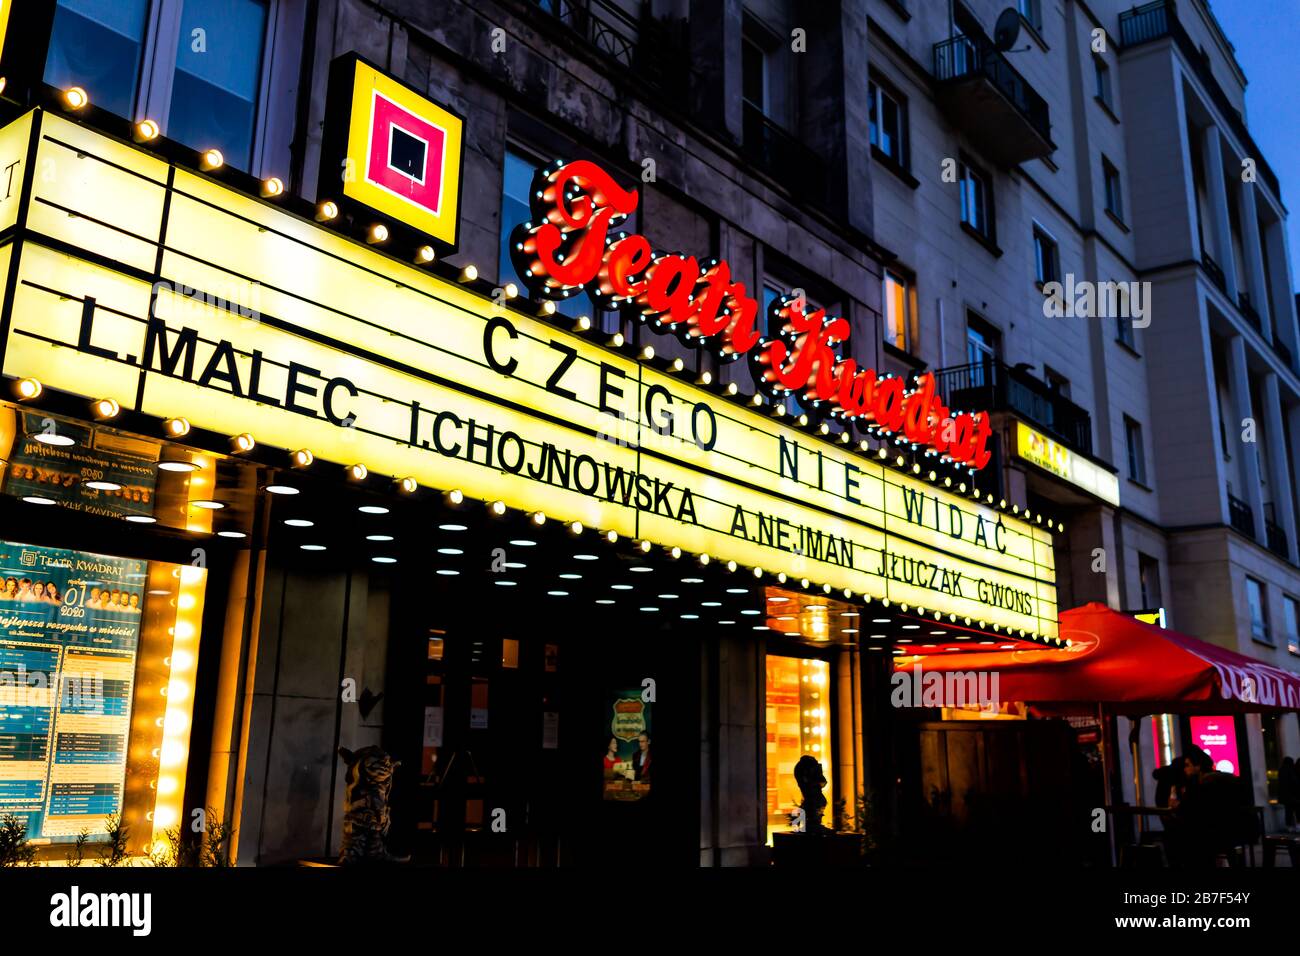 Warsaw, Poland - December 19, 2019: Neon illuminated sign for Teatr Kwadrat or Theater Square sign in Polish outside at Marszalkowska street in Warsza Stock Photo